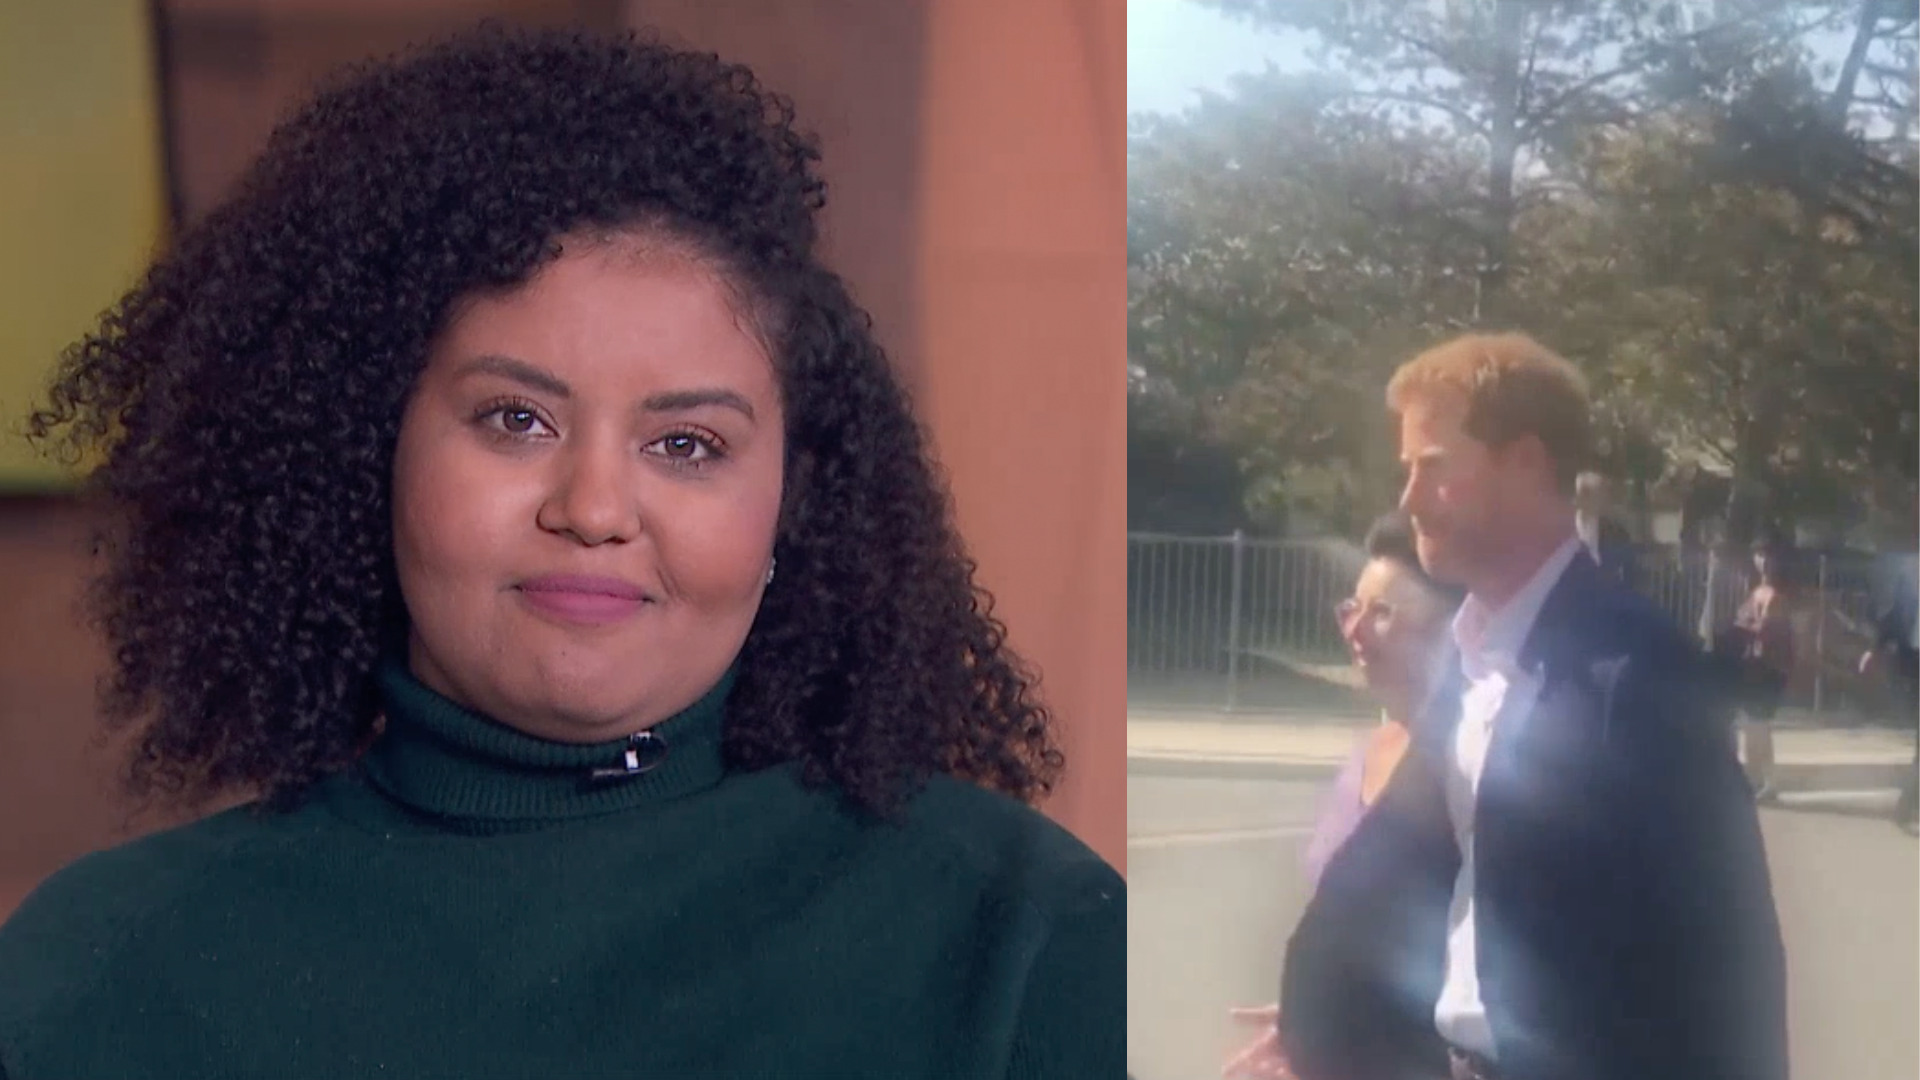 We can't get over Faiza's awkward encounter with Prince Harry